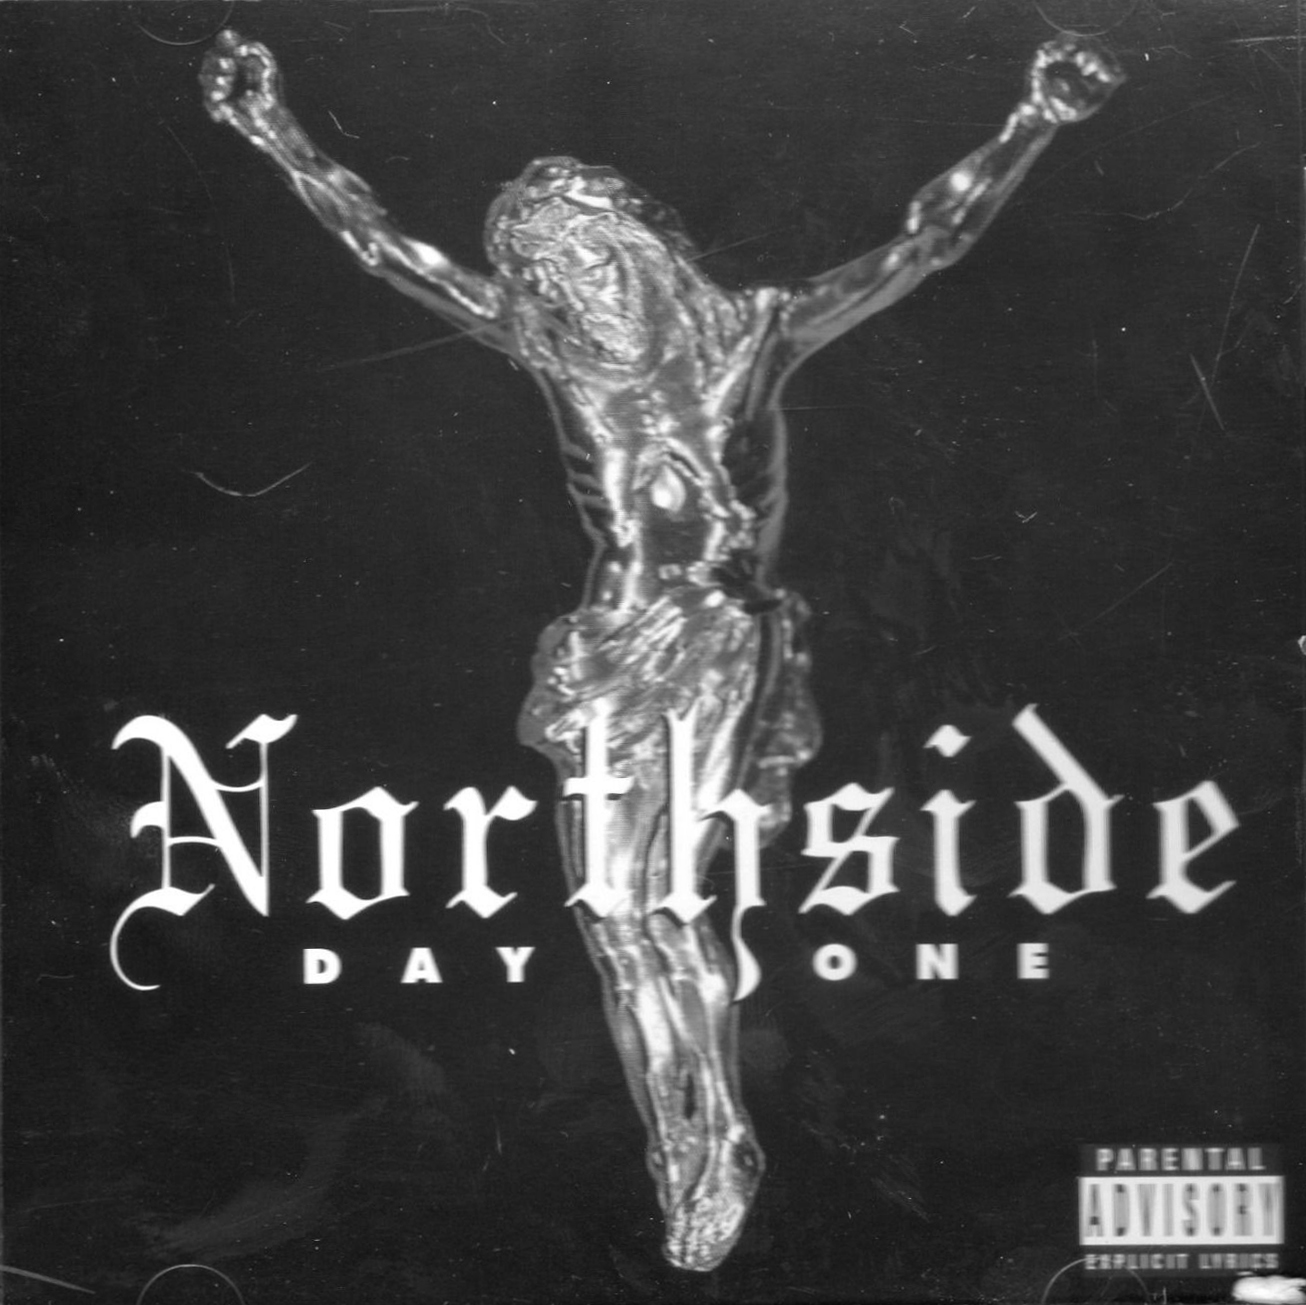 Northside / Day One